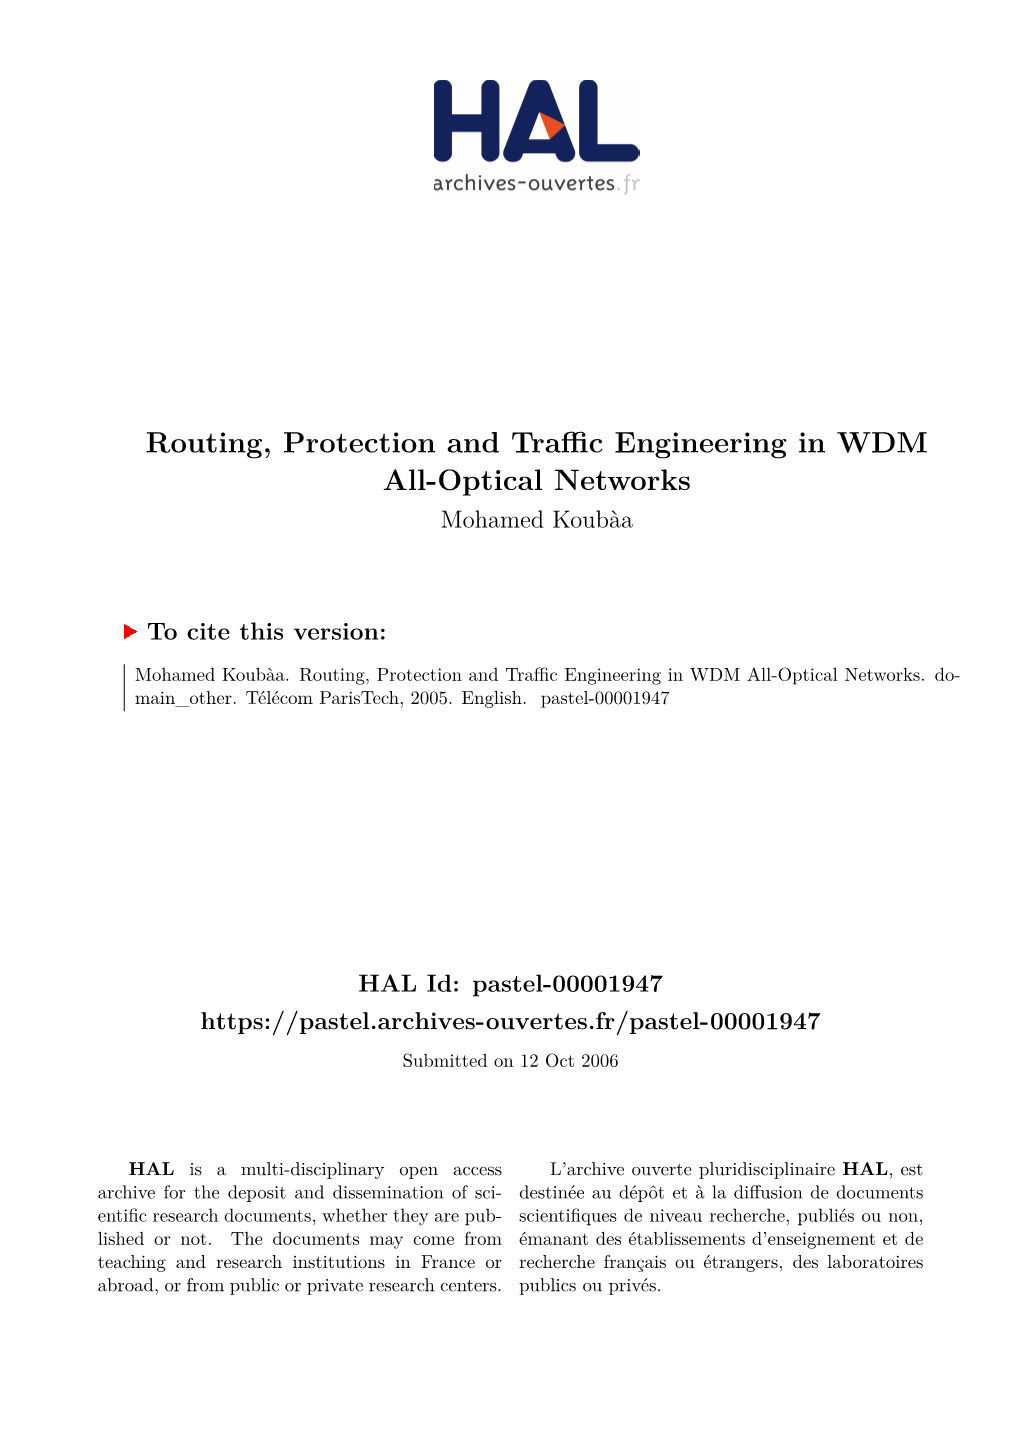 Routing, Protection and Traffic Engineering in WDM All-Optical